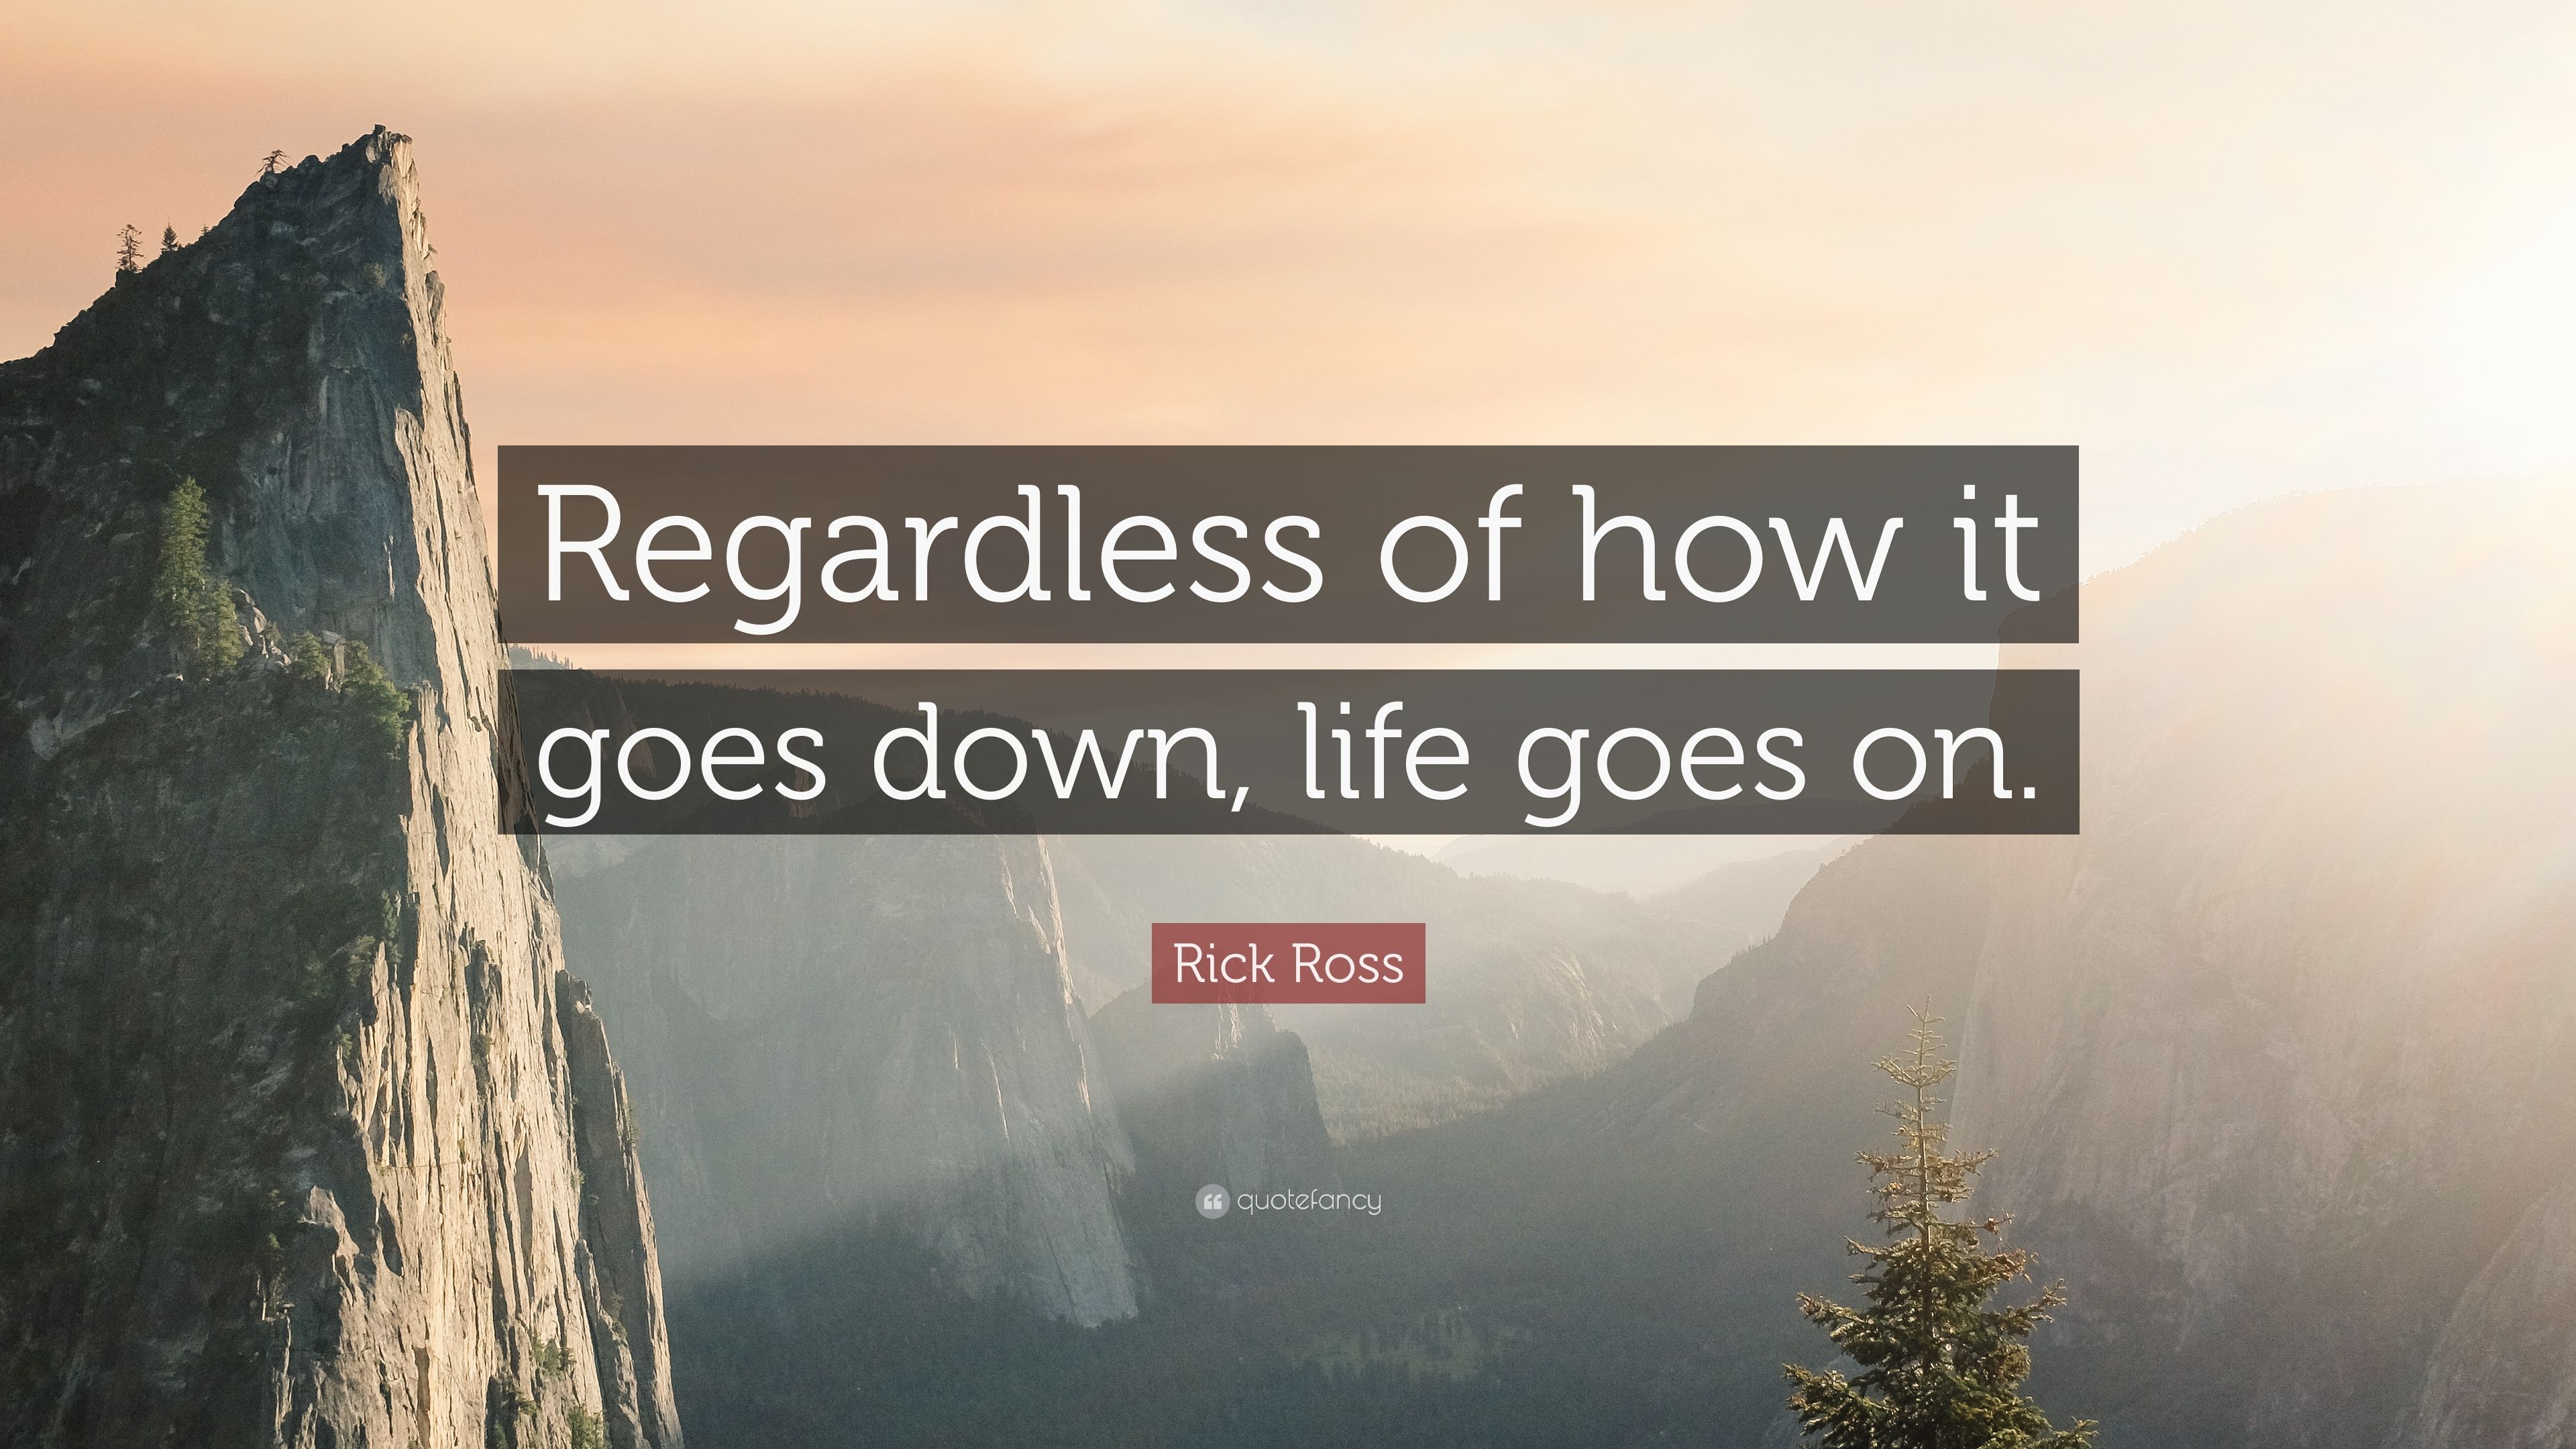 Rick Ross Quote: “Regardless of how it goes down, life goes